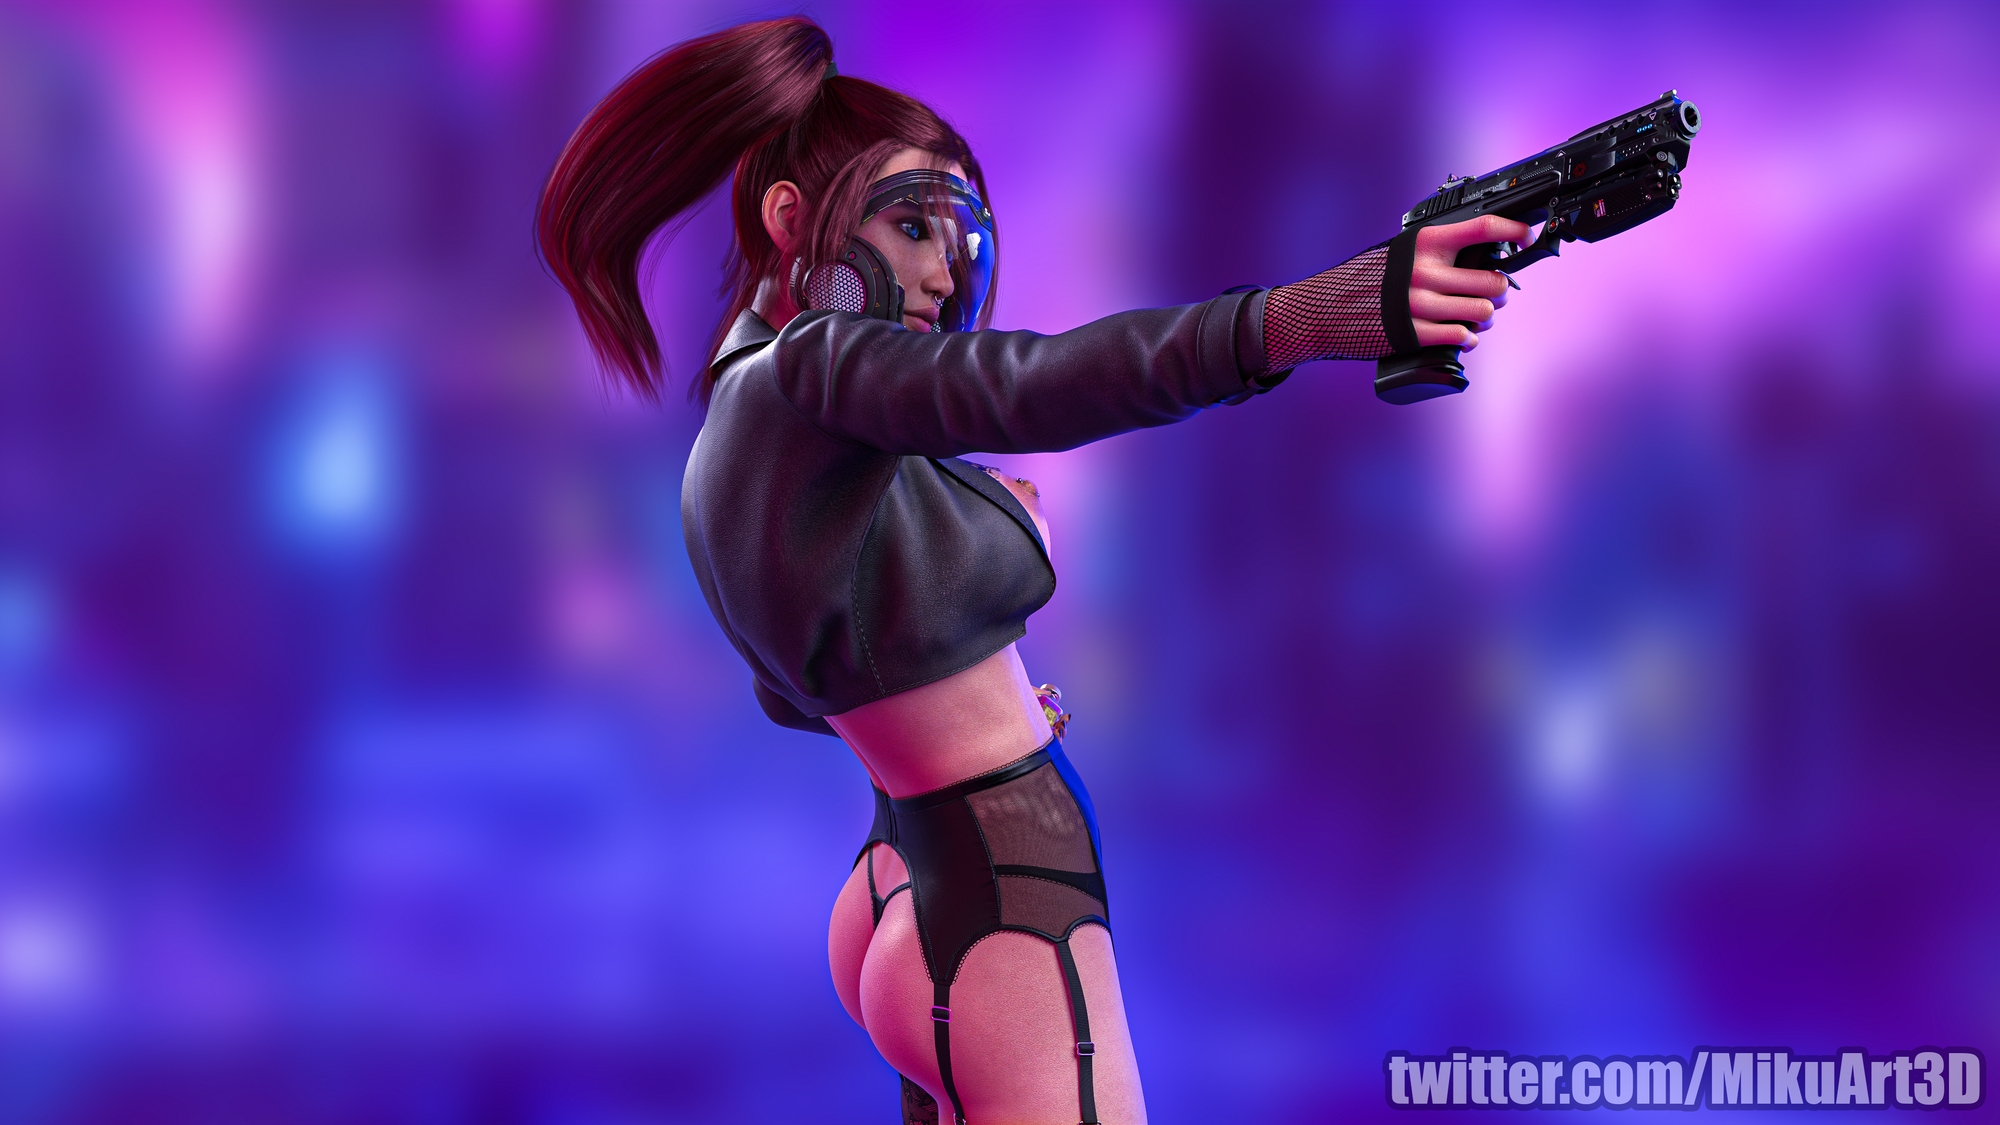 Guns Out  3d Girl Sexy Boobs Naked Weapon Stockings Fishnet Camel Toe Big Tits Big Breasts Fake Tits Leather Lingerie Sexy Lingerie Cyberpunk Punk Red Hair Mask Nipple Piercing Piercing Blue Eyes Black Panties Black Clothes Black Stockings Big Boobs 4